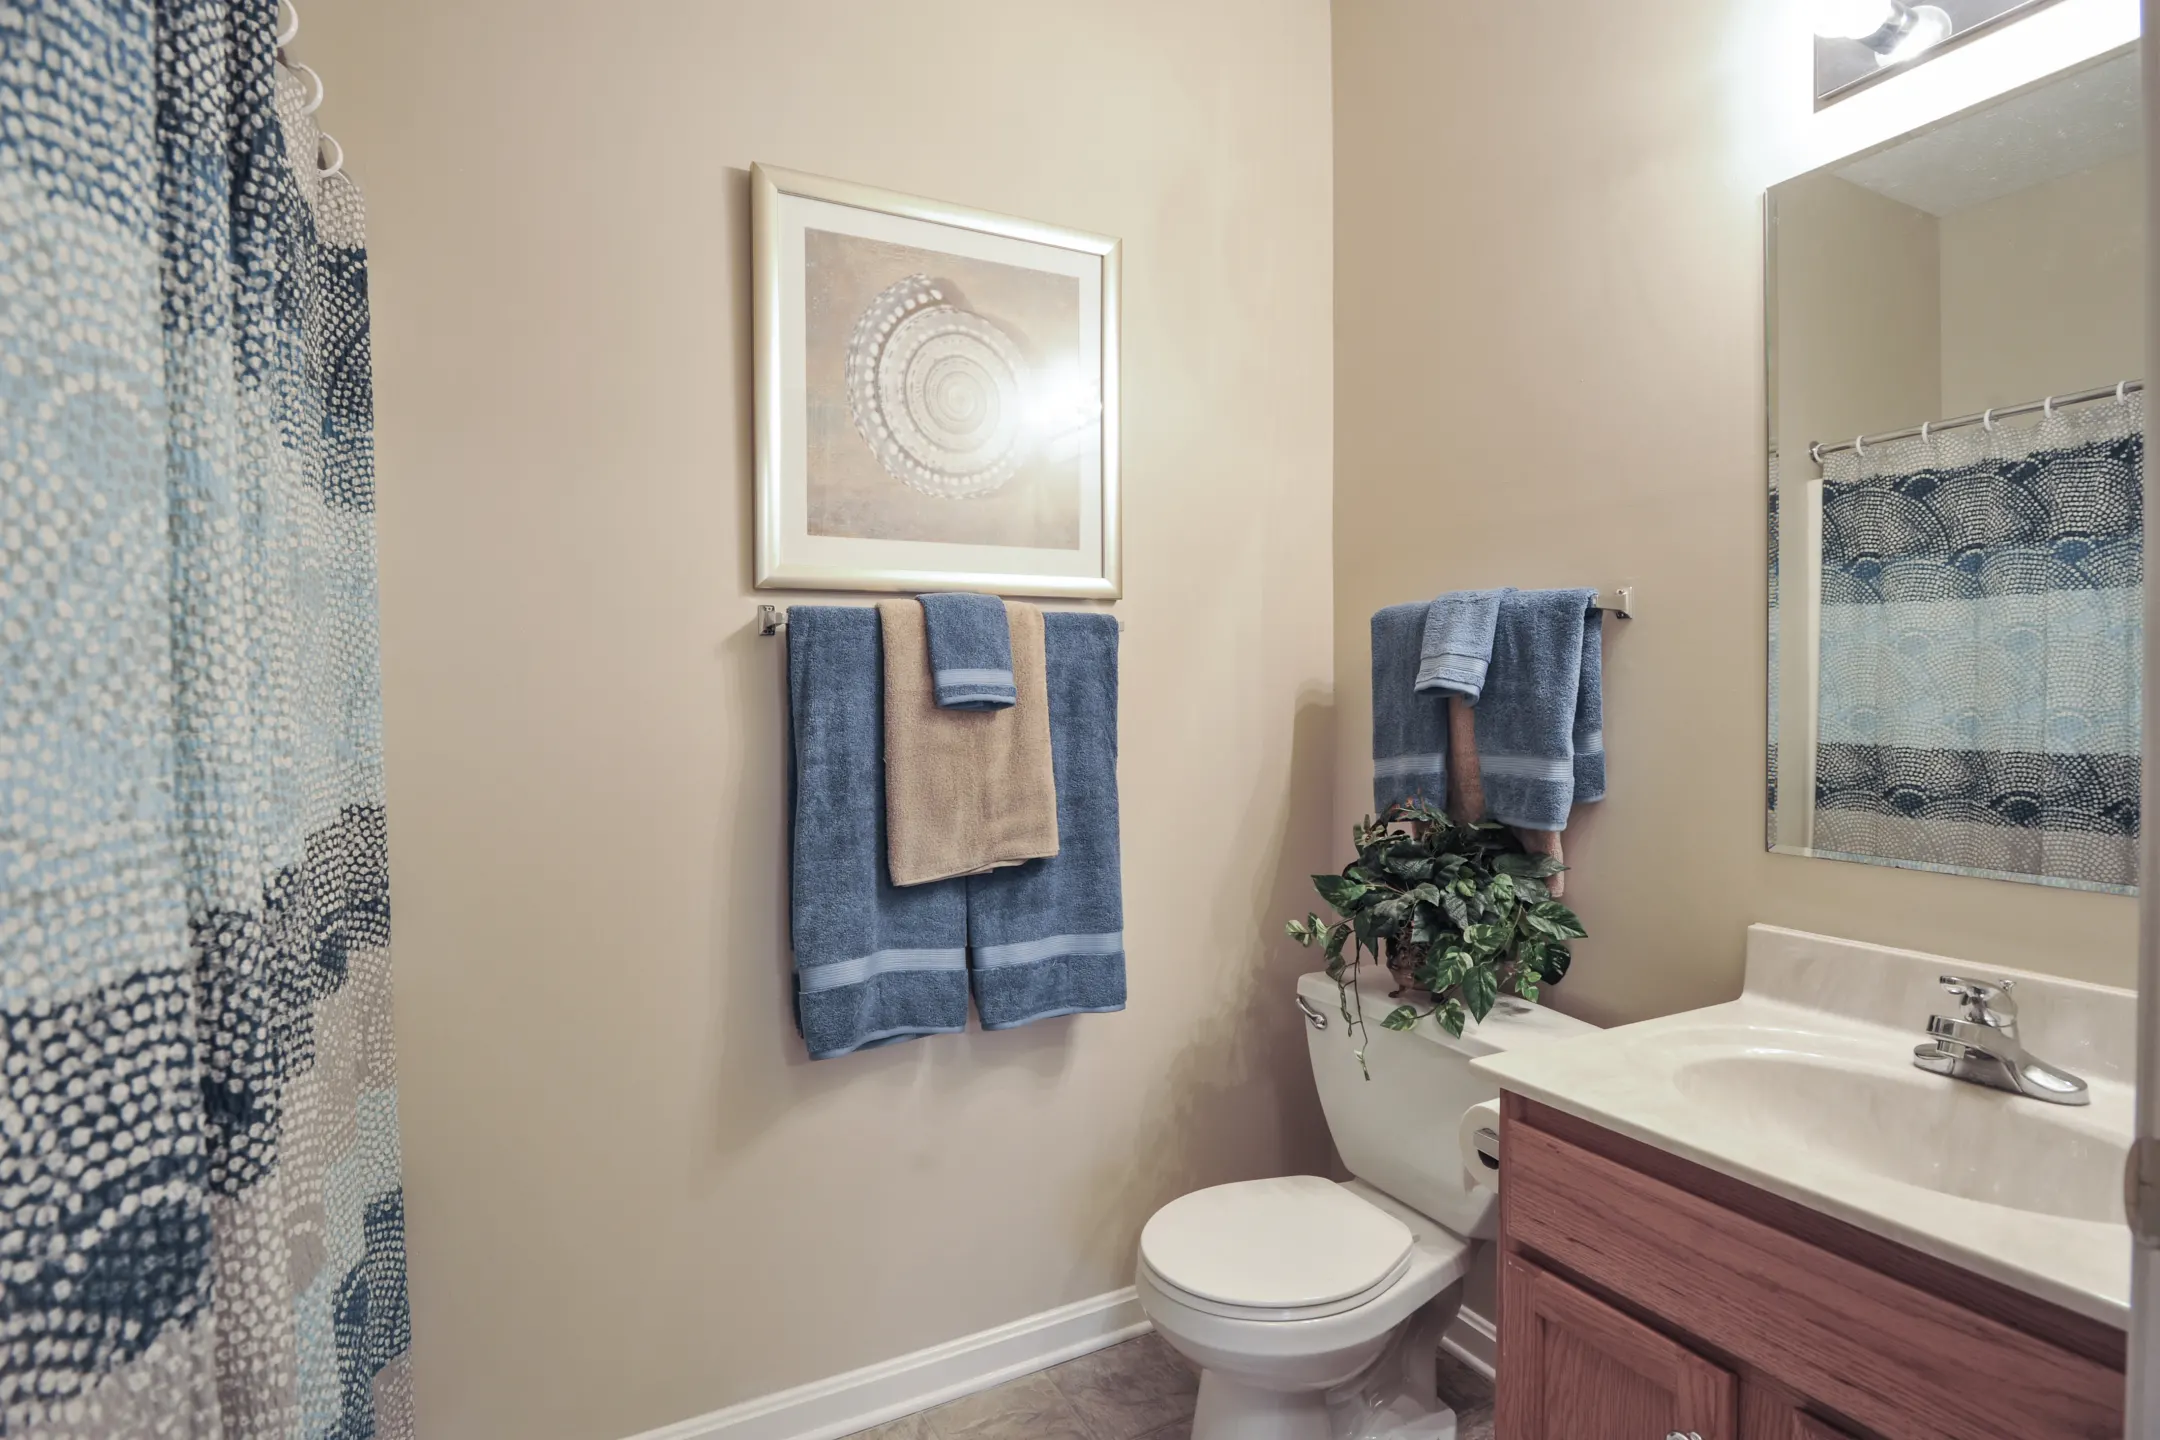 Bathroom - Lighthouse Apartments At Pebble Creek - Jeffersonville, IN